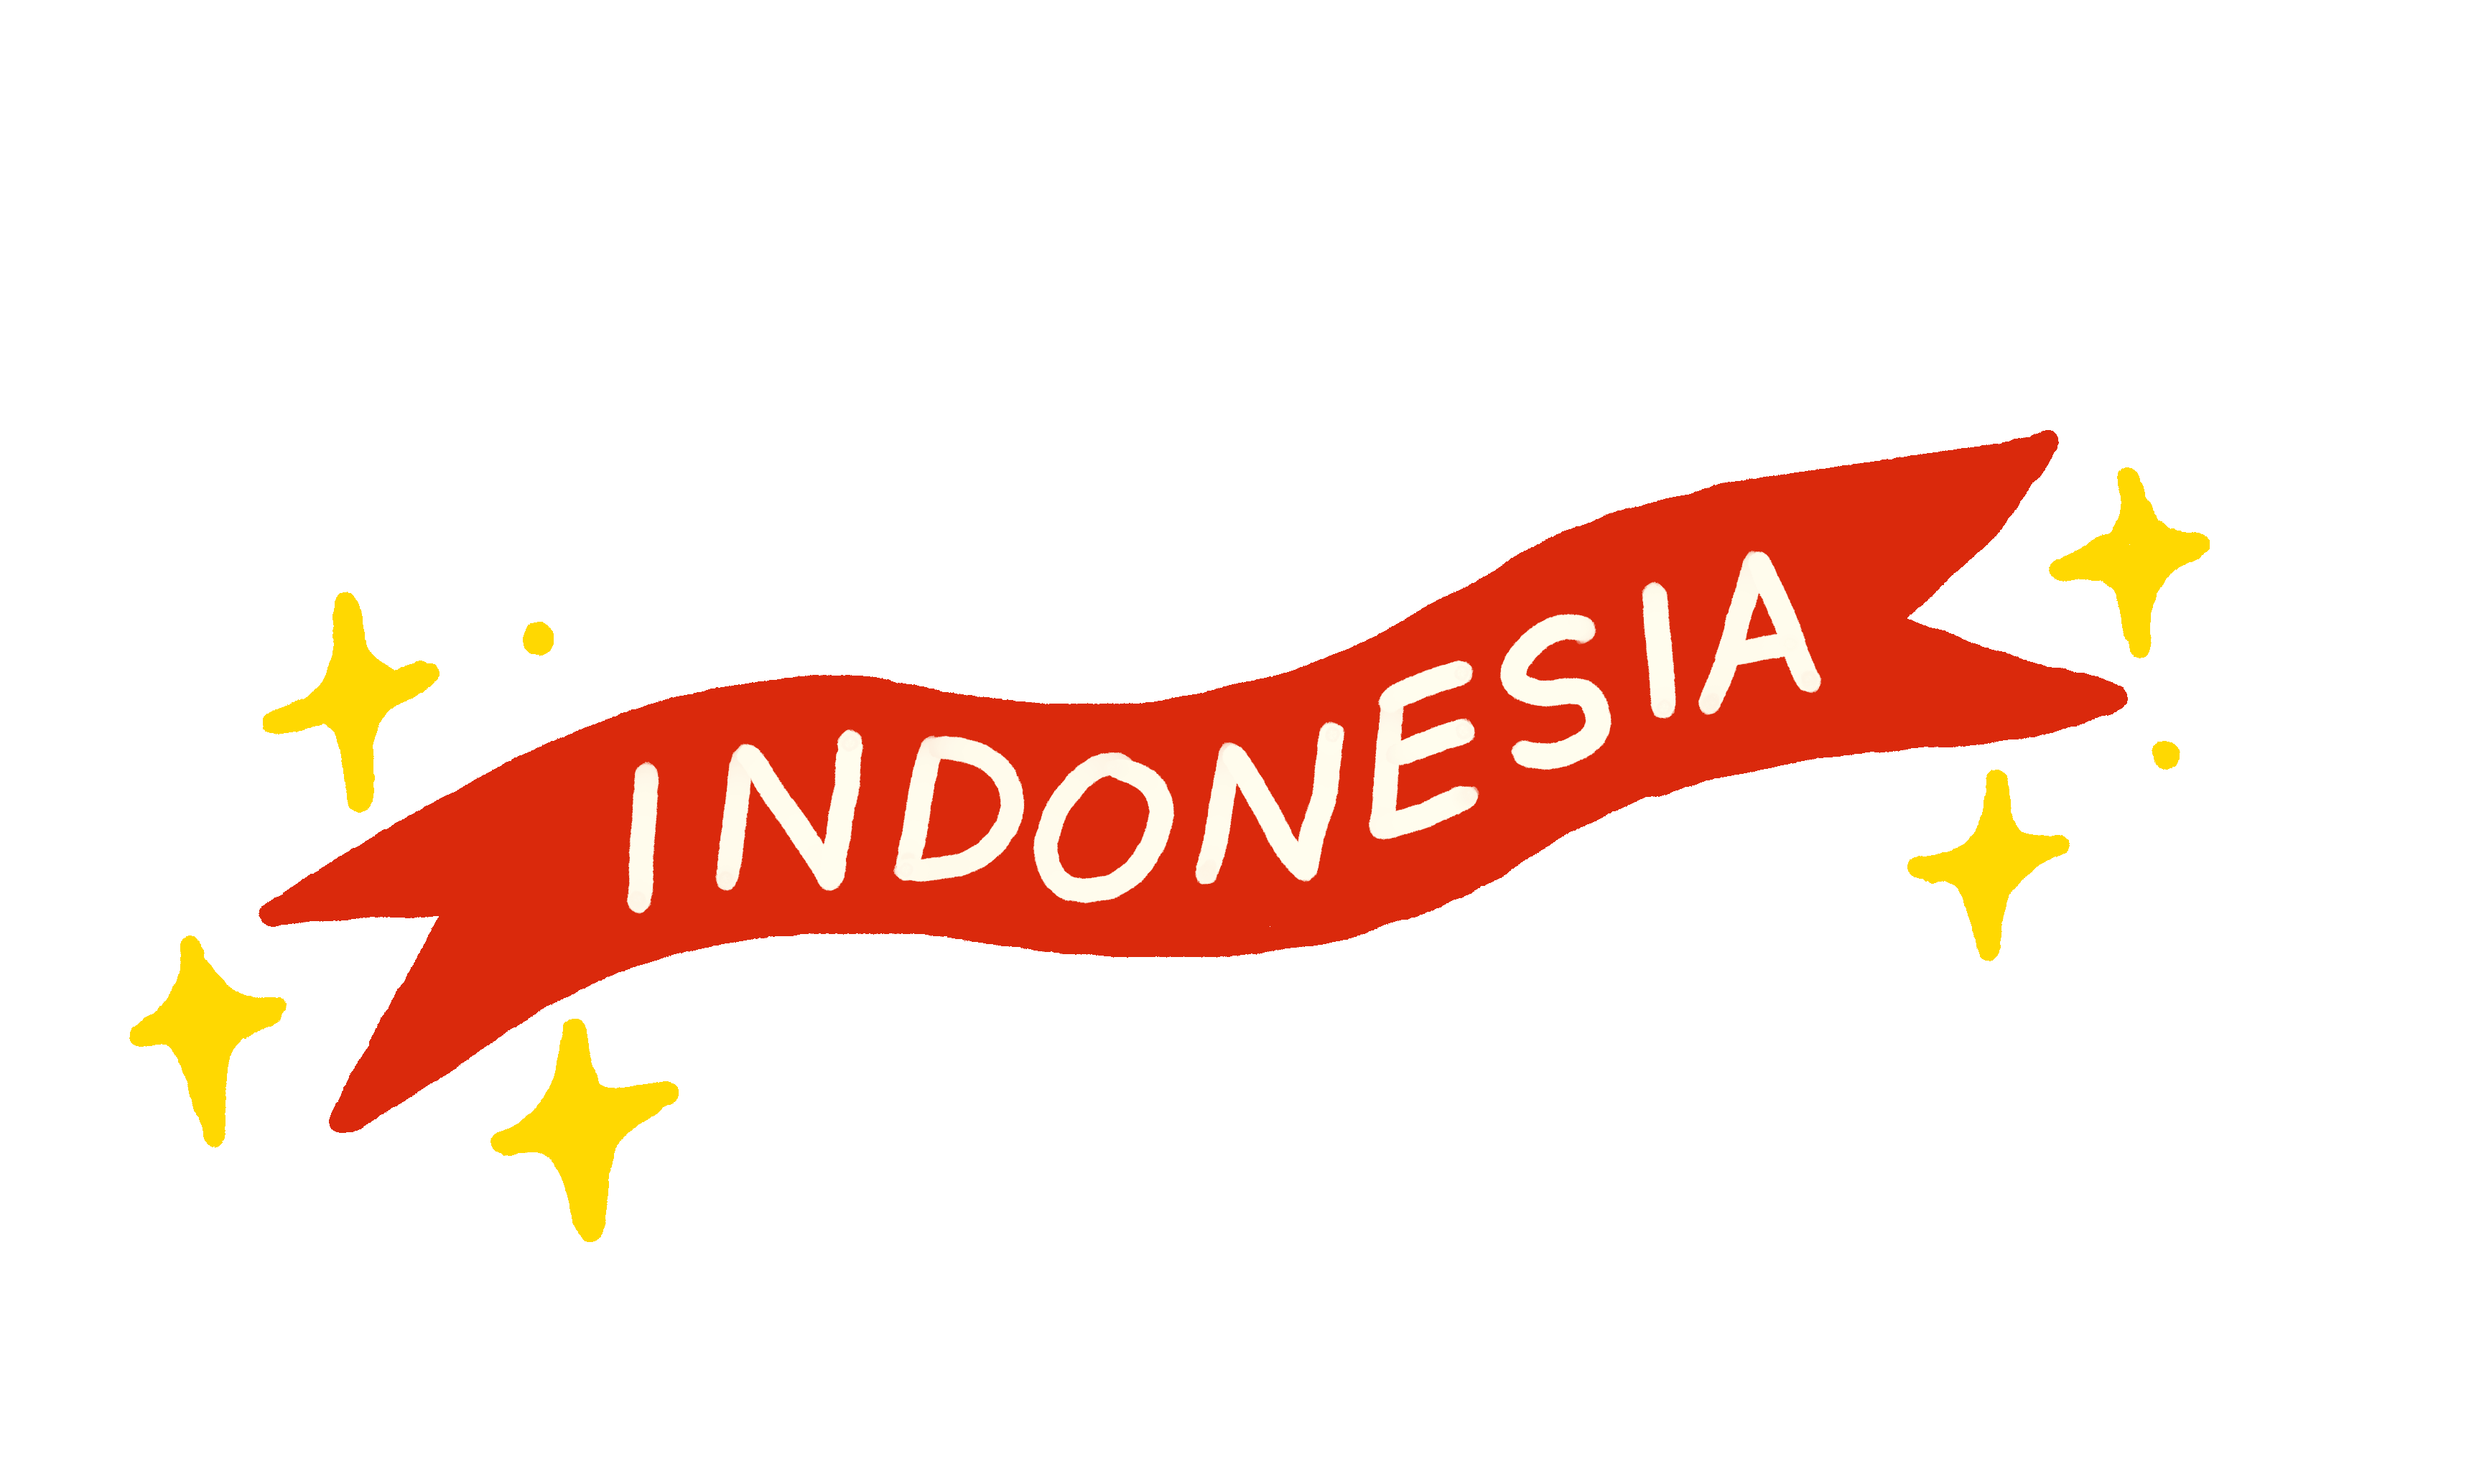 Indonesia Merdeka Sticker by ayangcempaka for iOS & Android | GIPHY